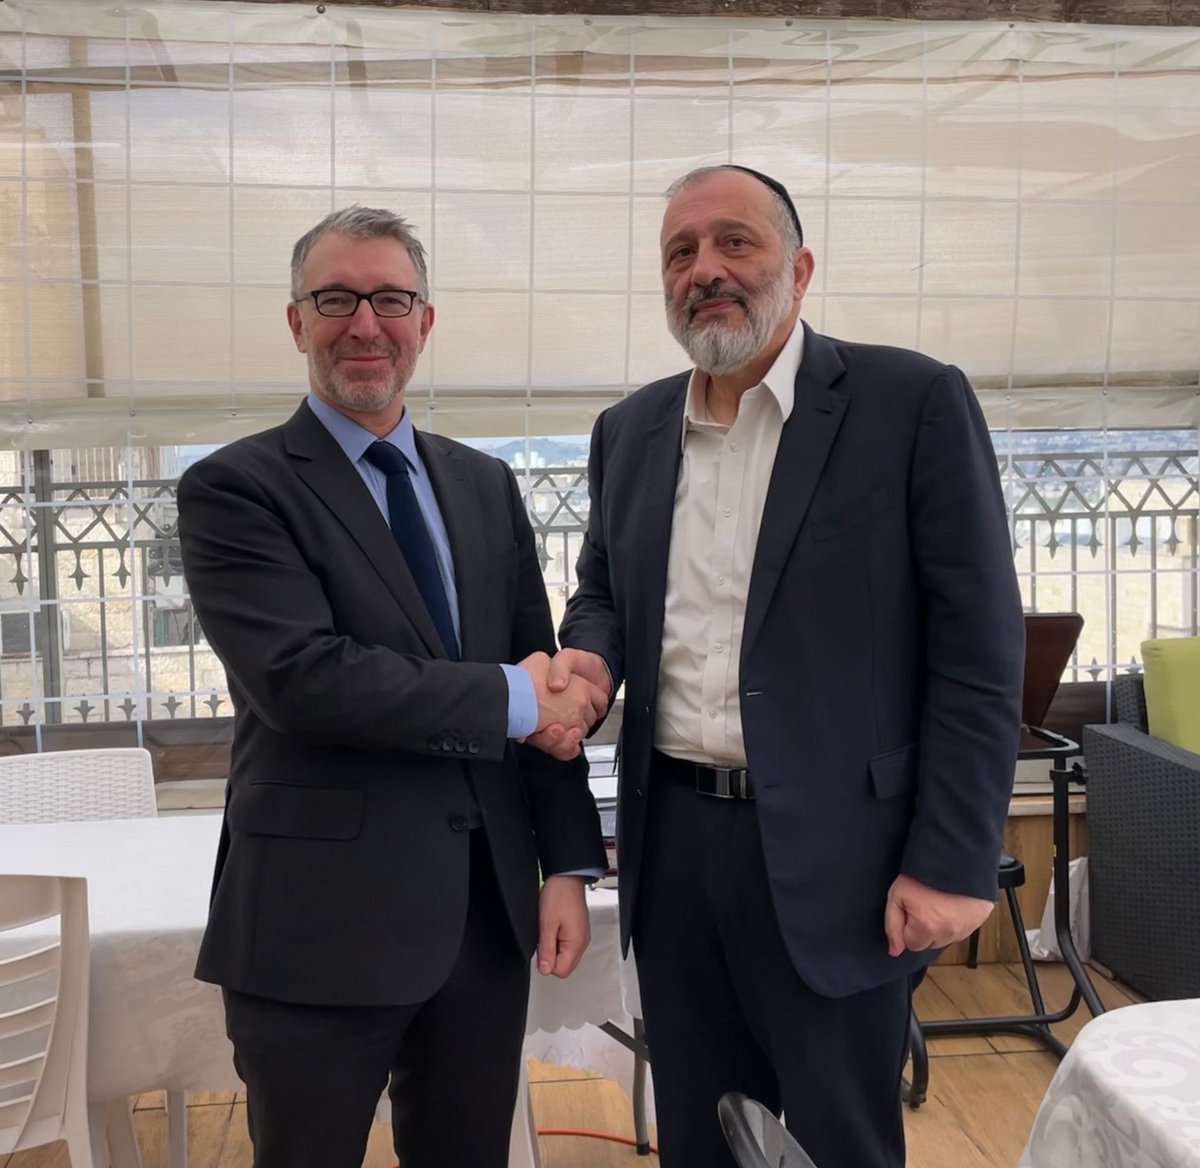 Yesterday I met with the head of Shas party, @ariyederi. We had an interesting and useful discussion of various issues on Gaza and the challenges of the current situation in the region.